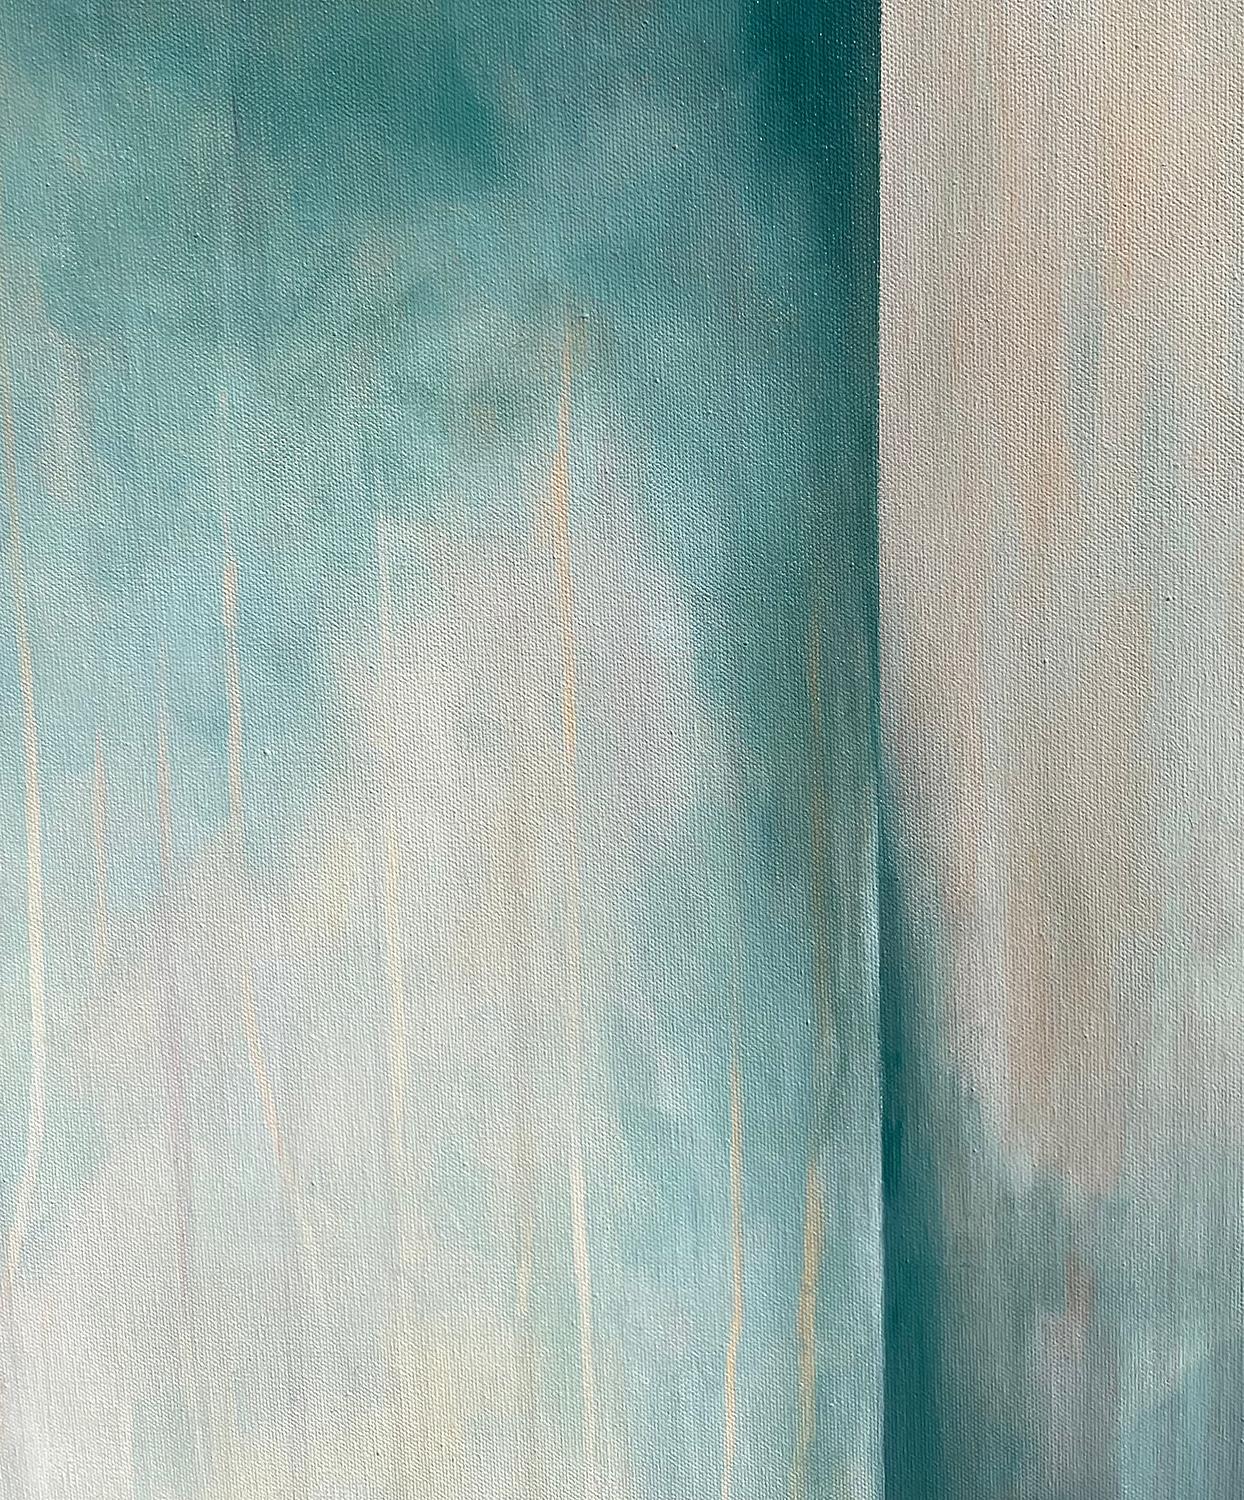 Diving In - Teal Cloud, Abstract Painting For Sale 2